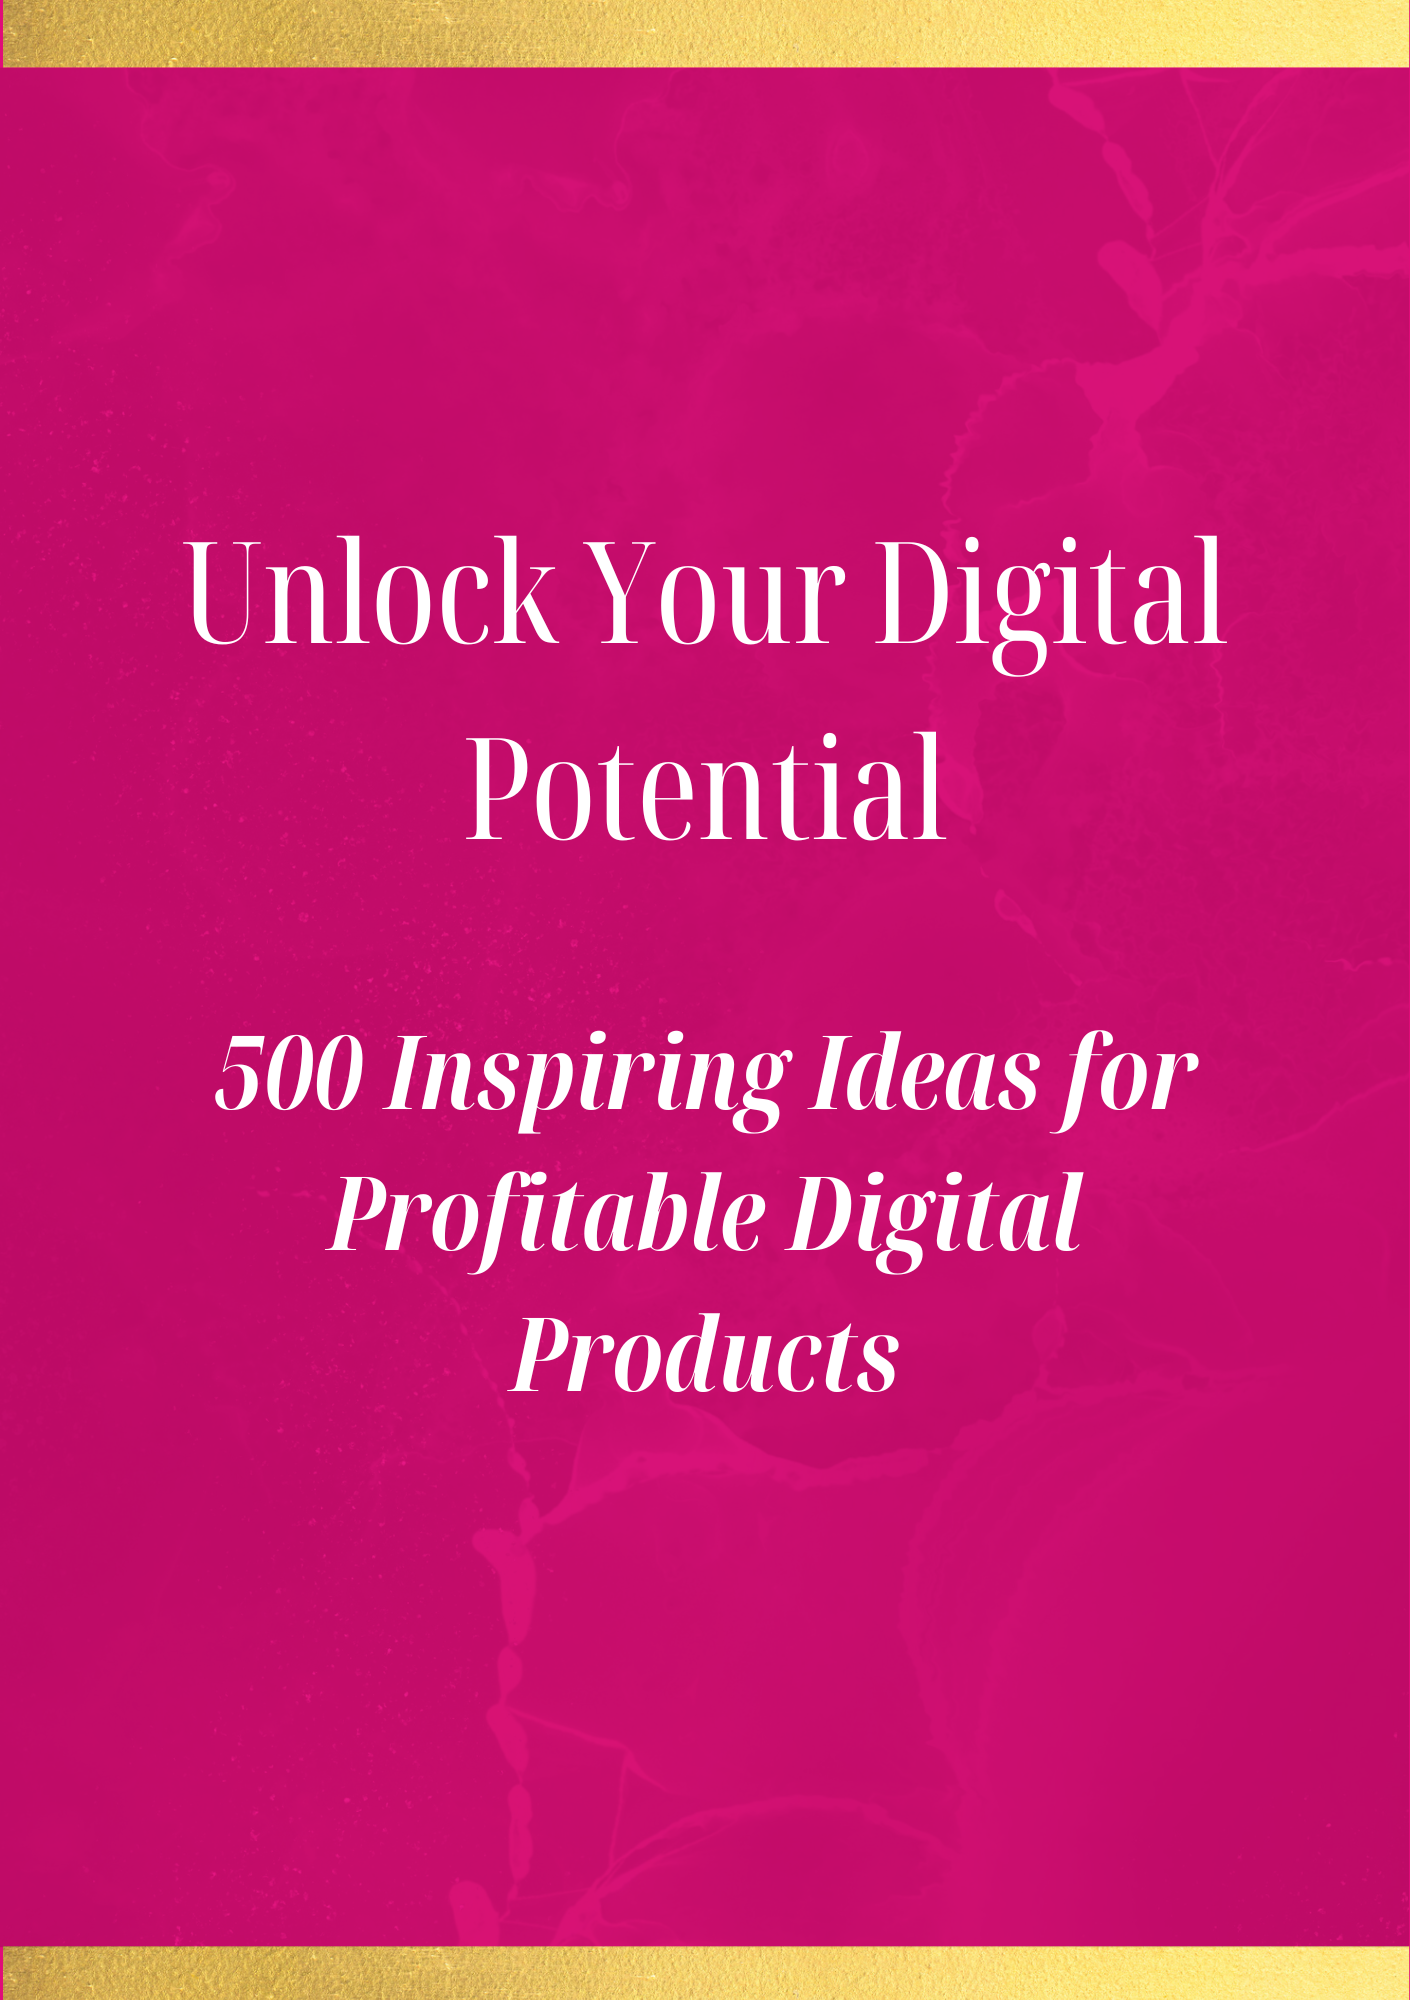 "Unlock Your Digital Potential: 500 Inspiring Ideas for Profitable Digital Products"